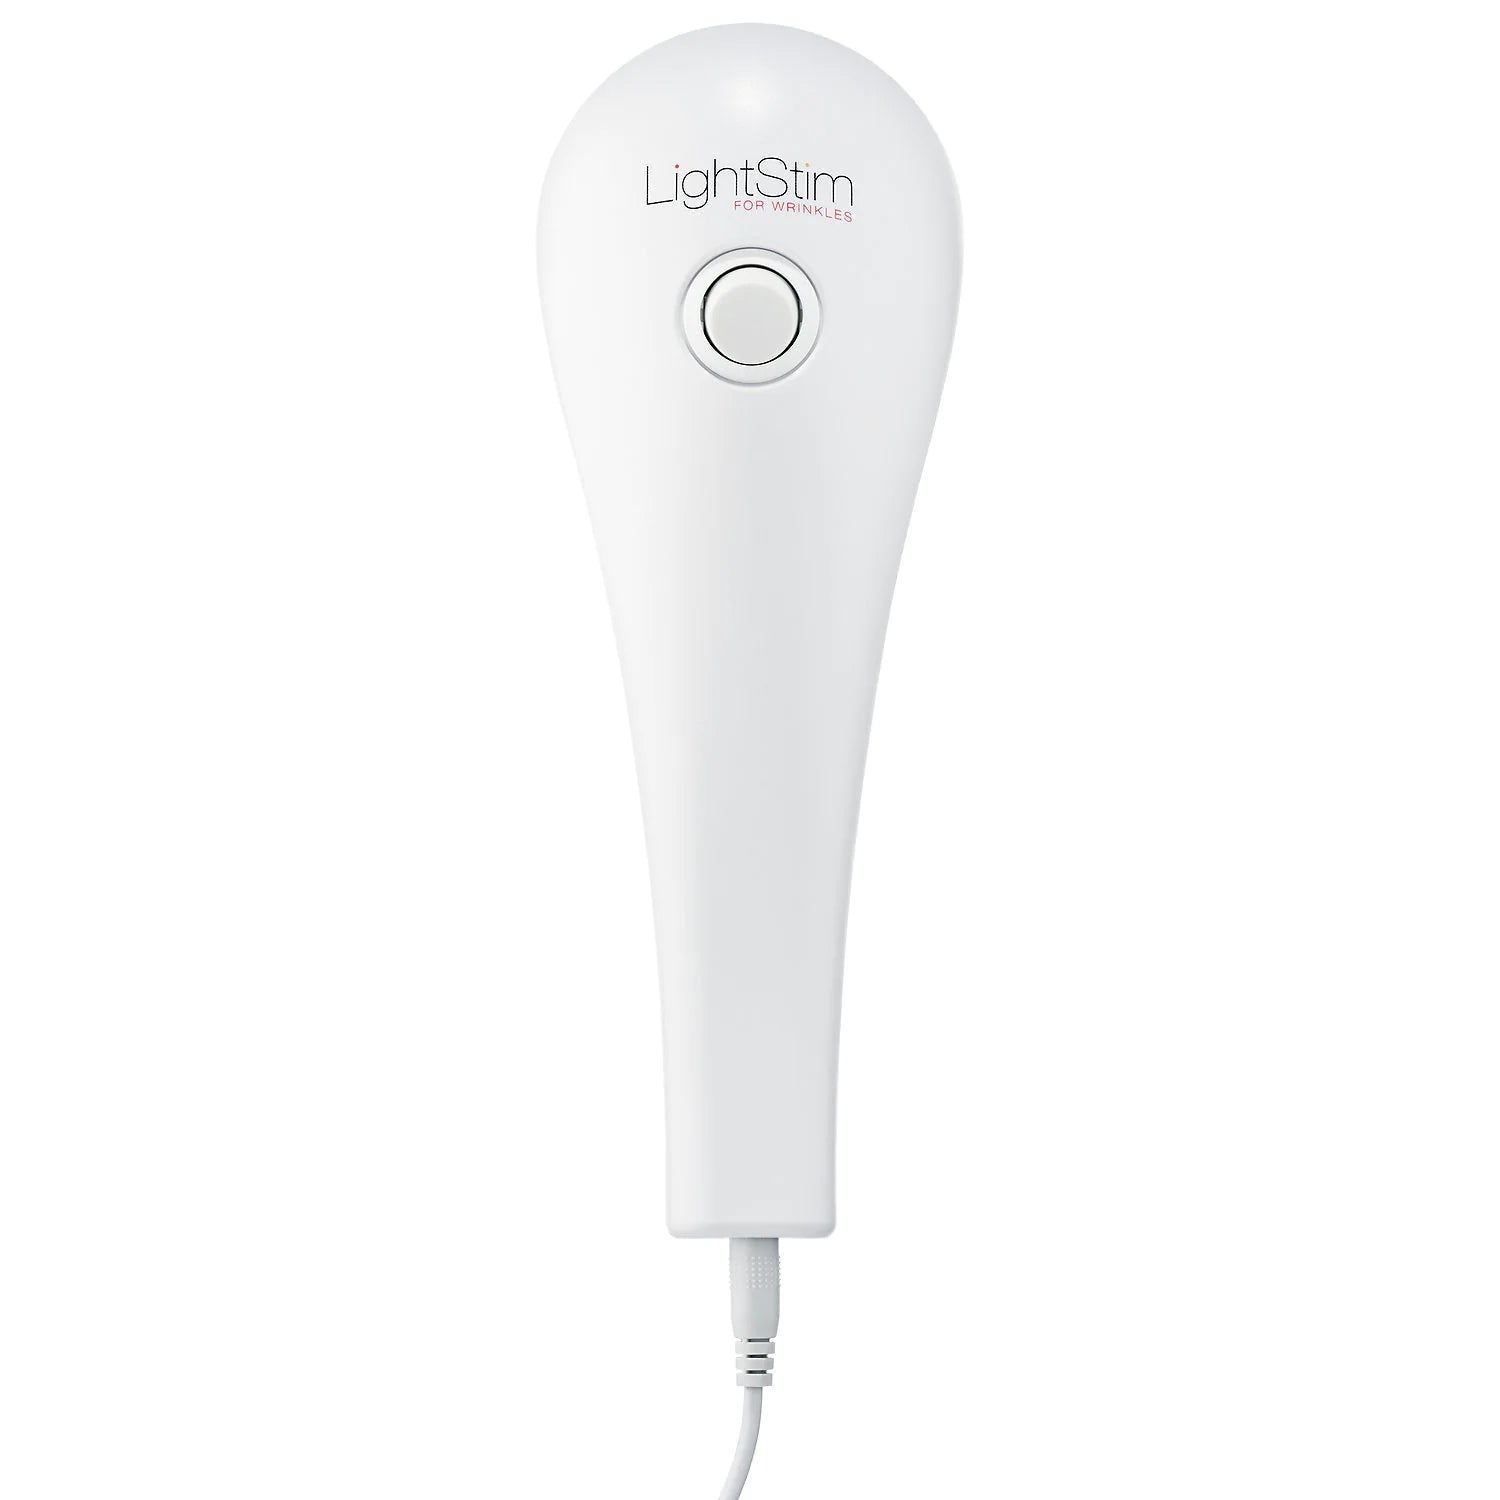 lightstim led low level light therapy device